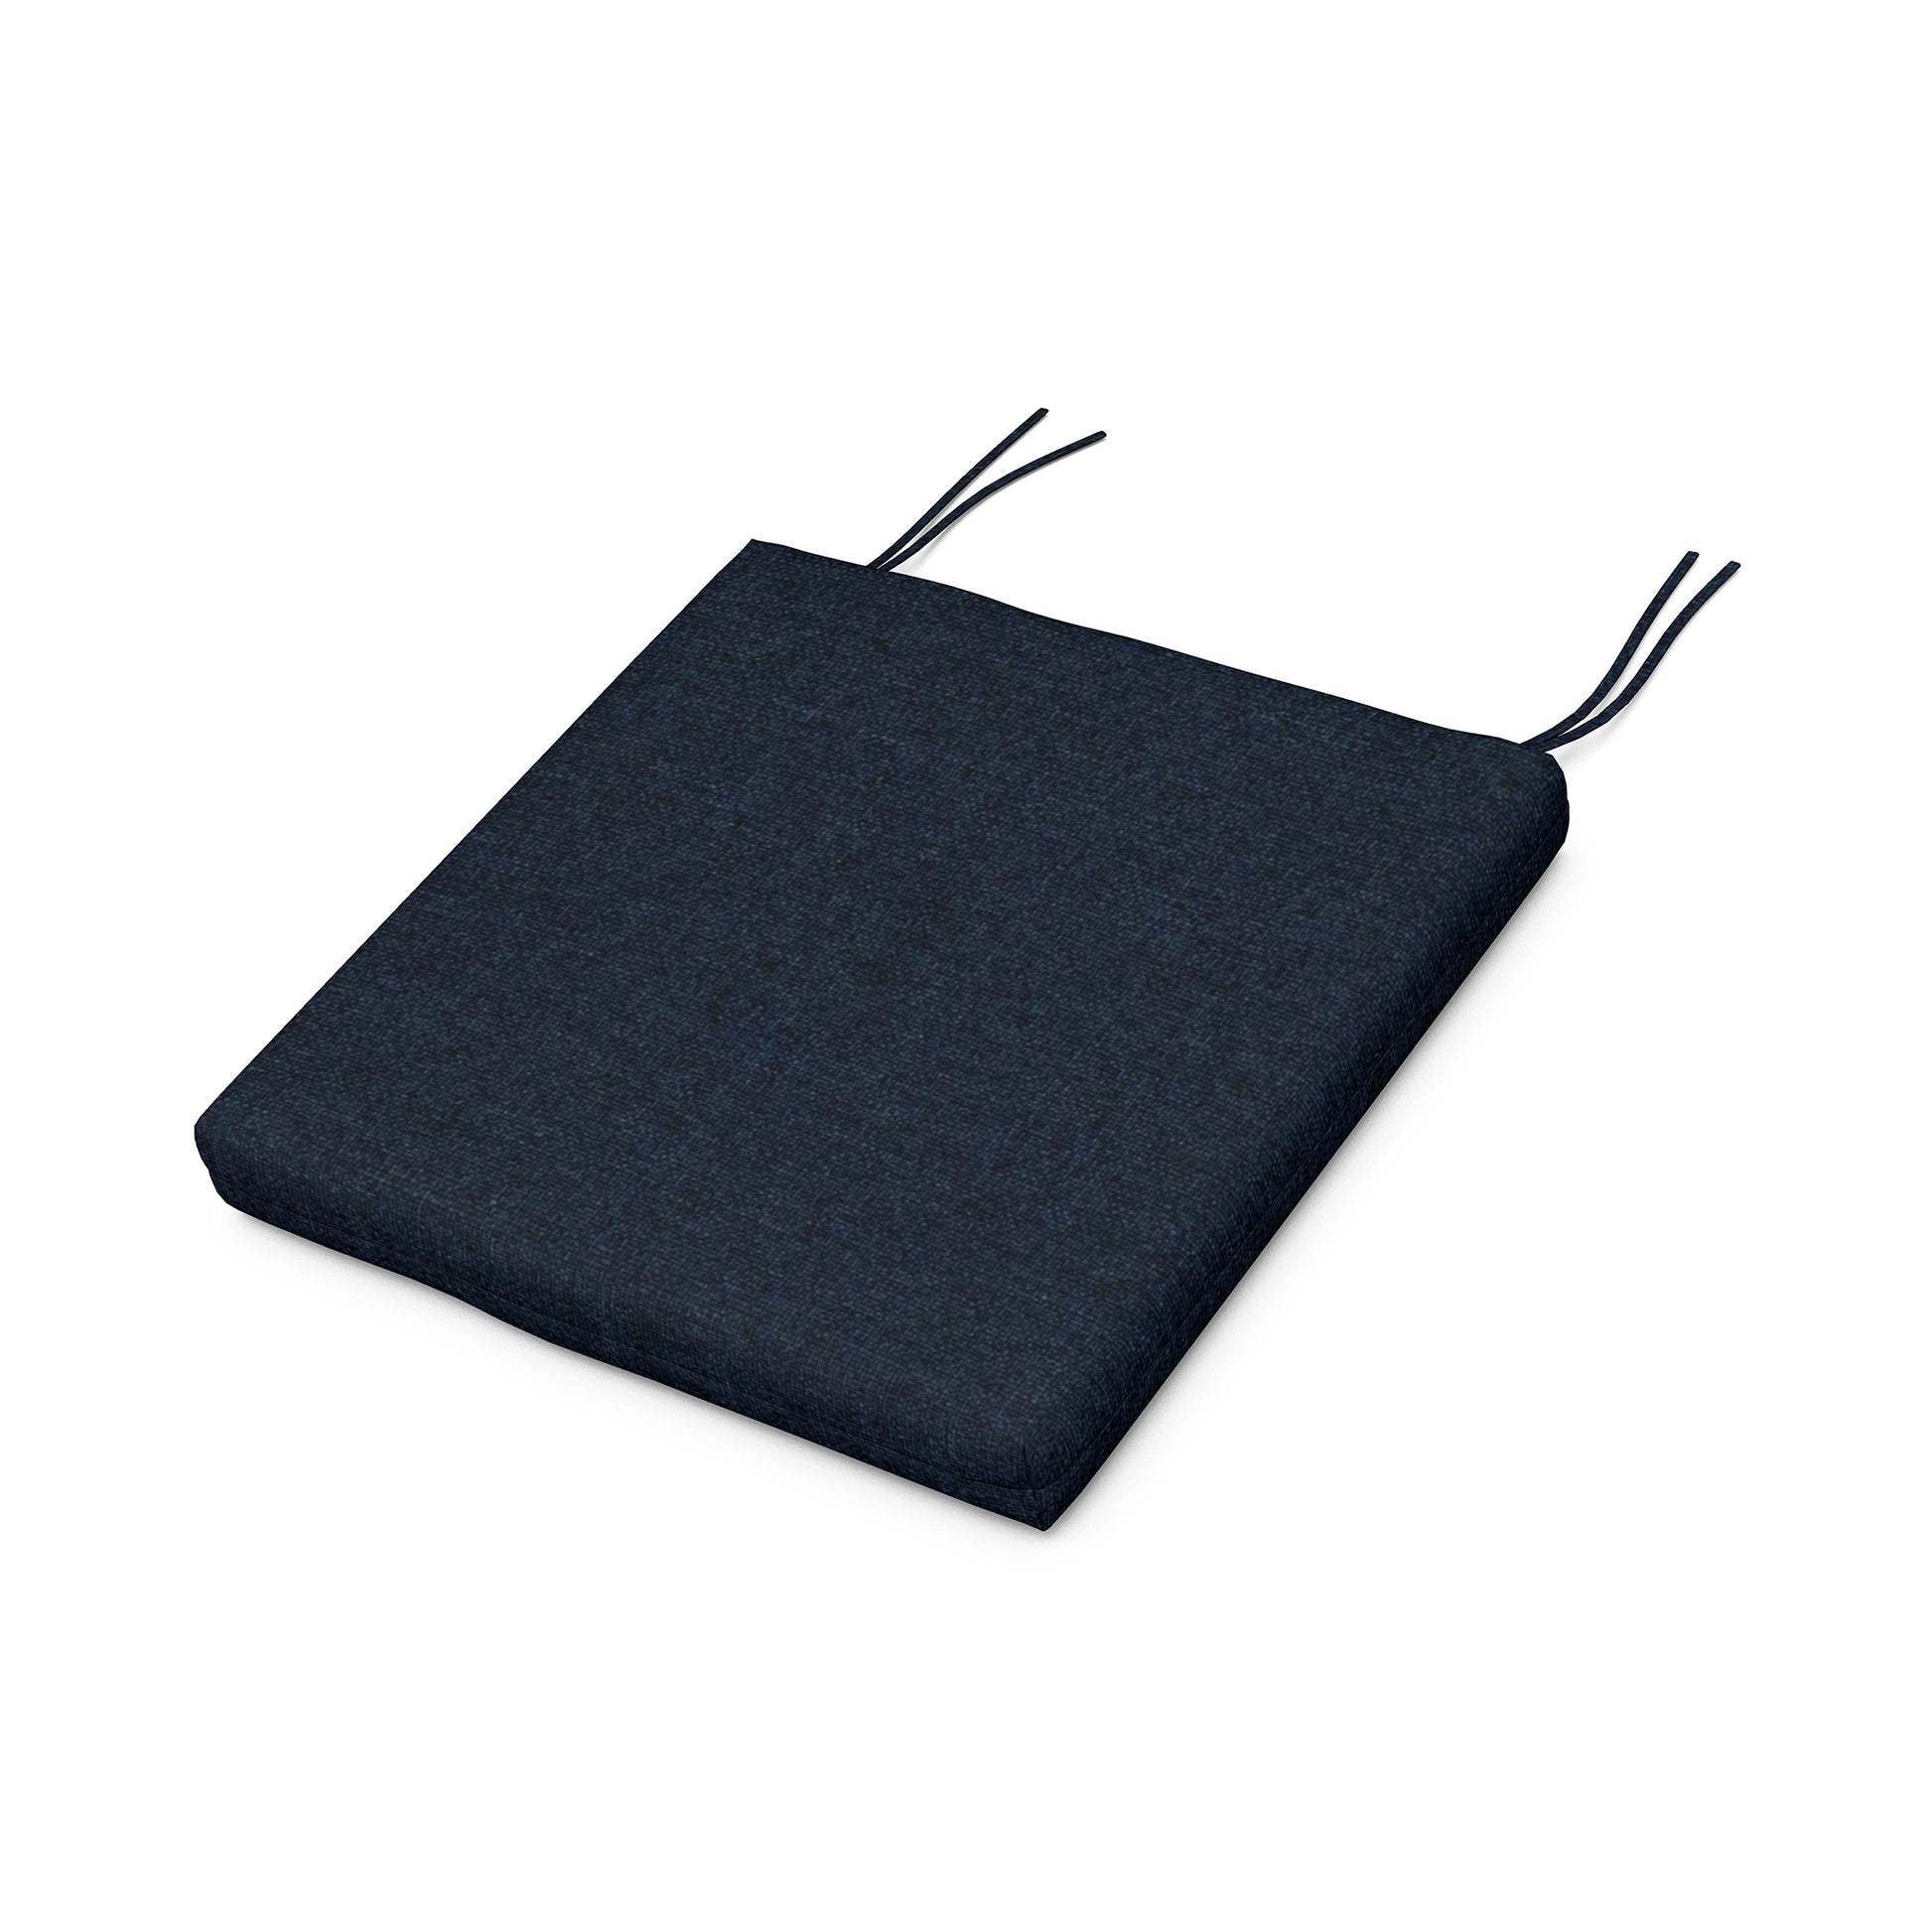 An image showcasing the XPWS0006 - Seat Cushion by POLYWOOD, made with weather-resistant upholstery fabric for optimal comfort and durability, presented against a clean white background.